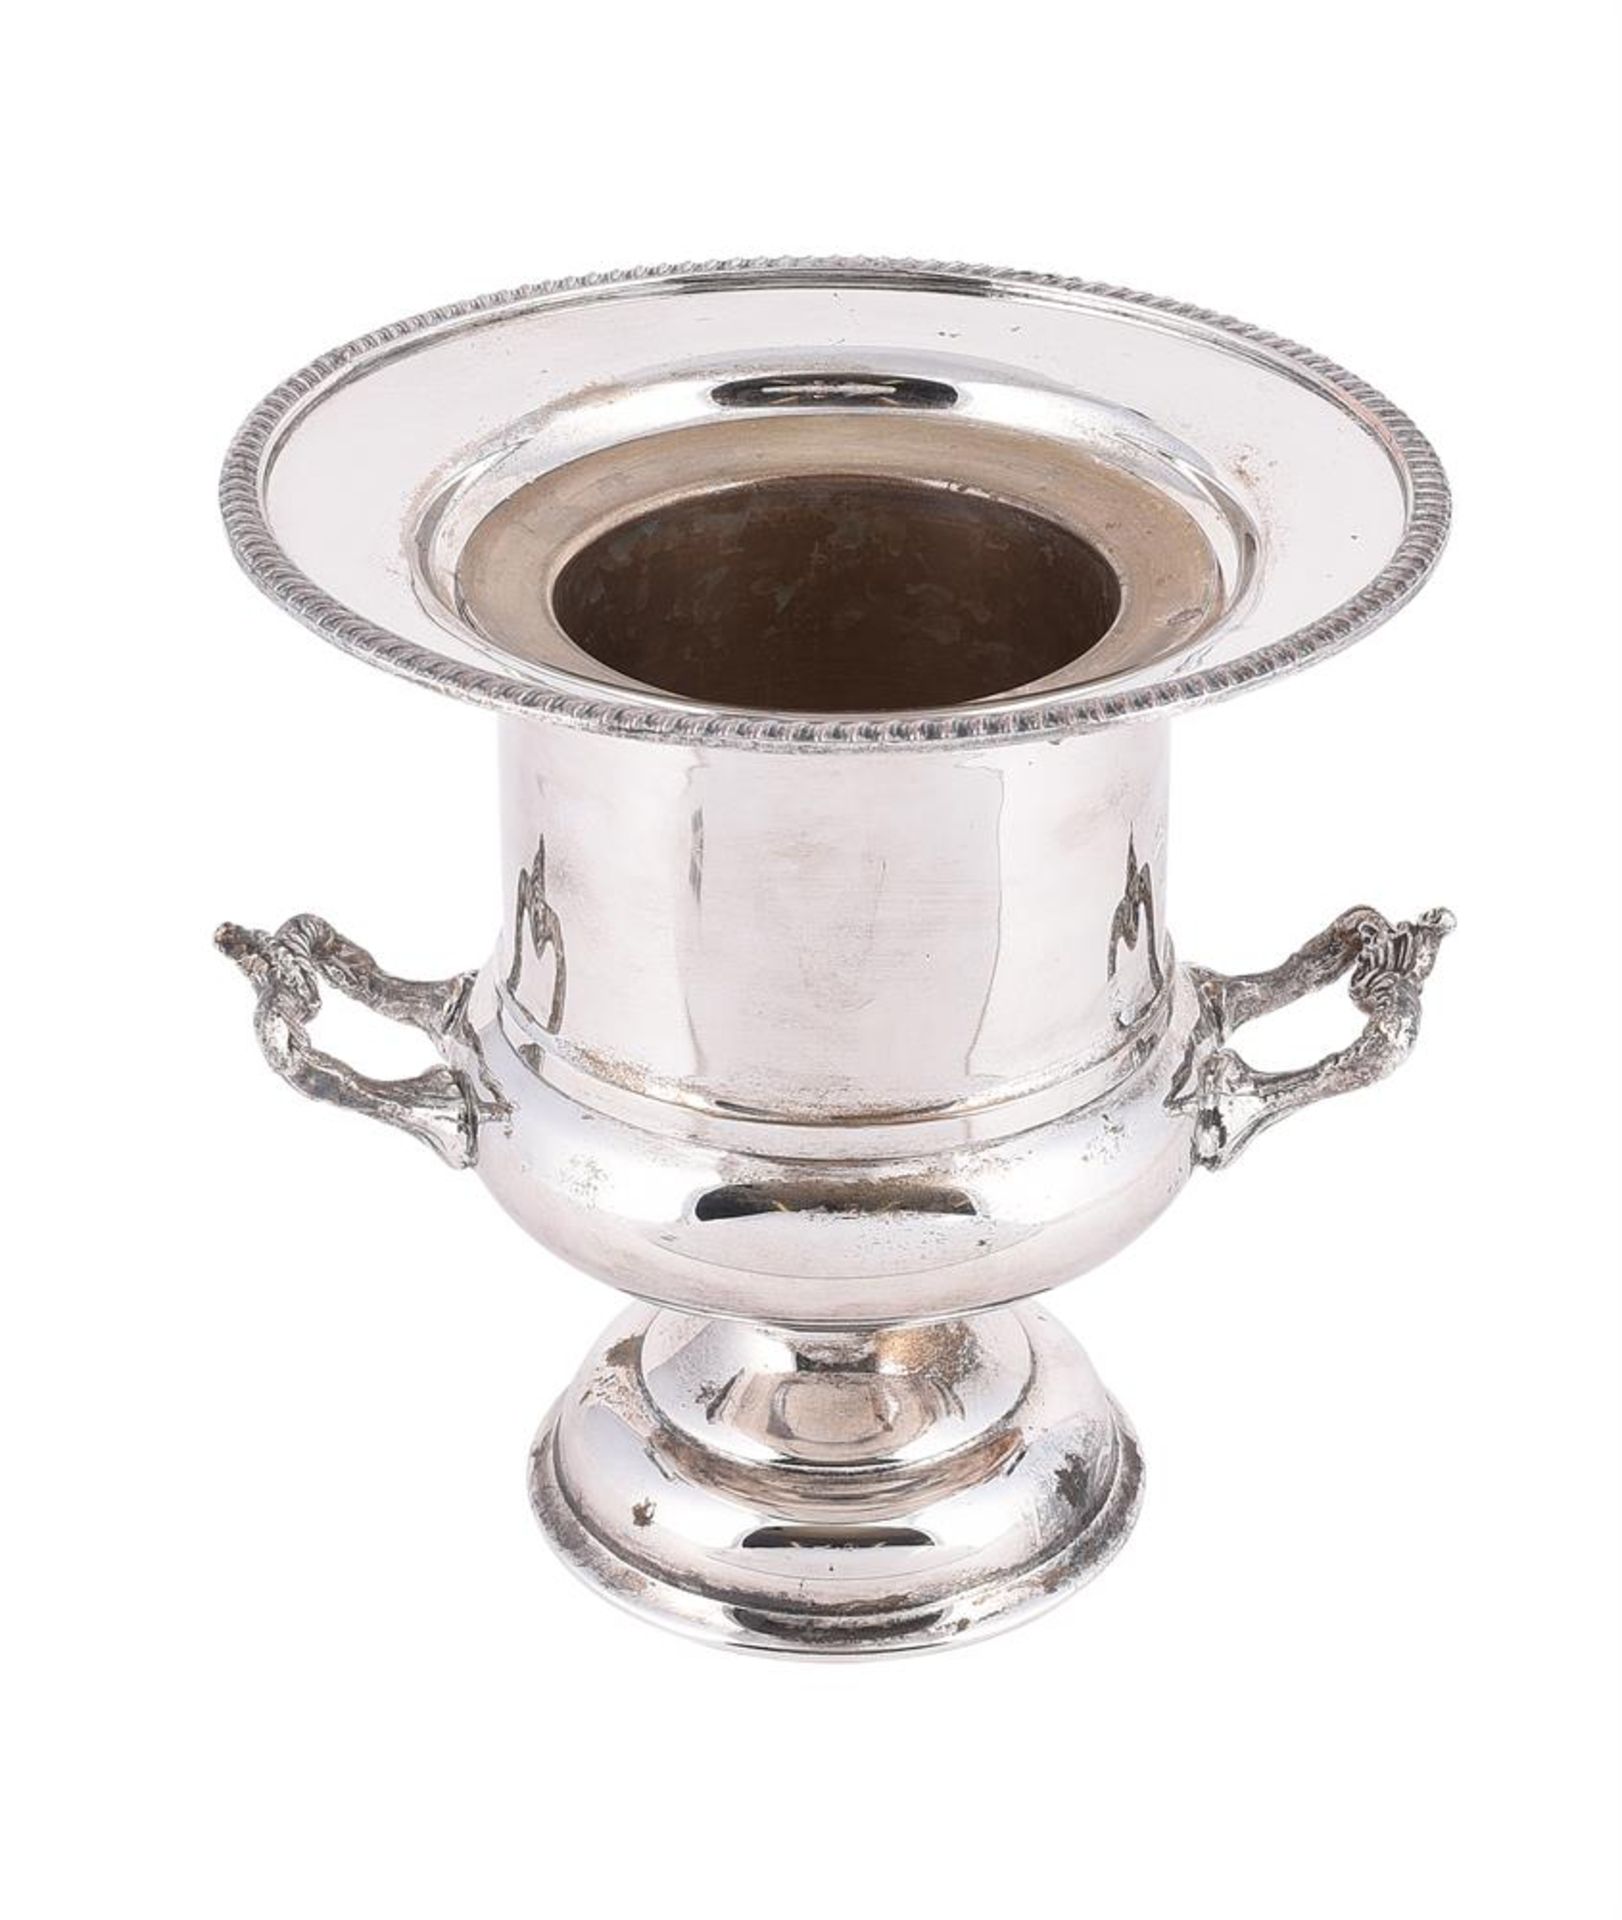 AN ELECTRO-PLATED OVAL TWIN HANDLED WINE COOLER